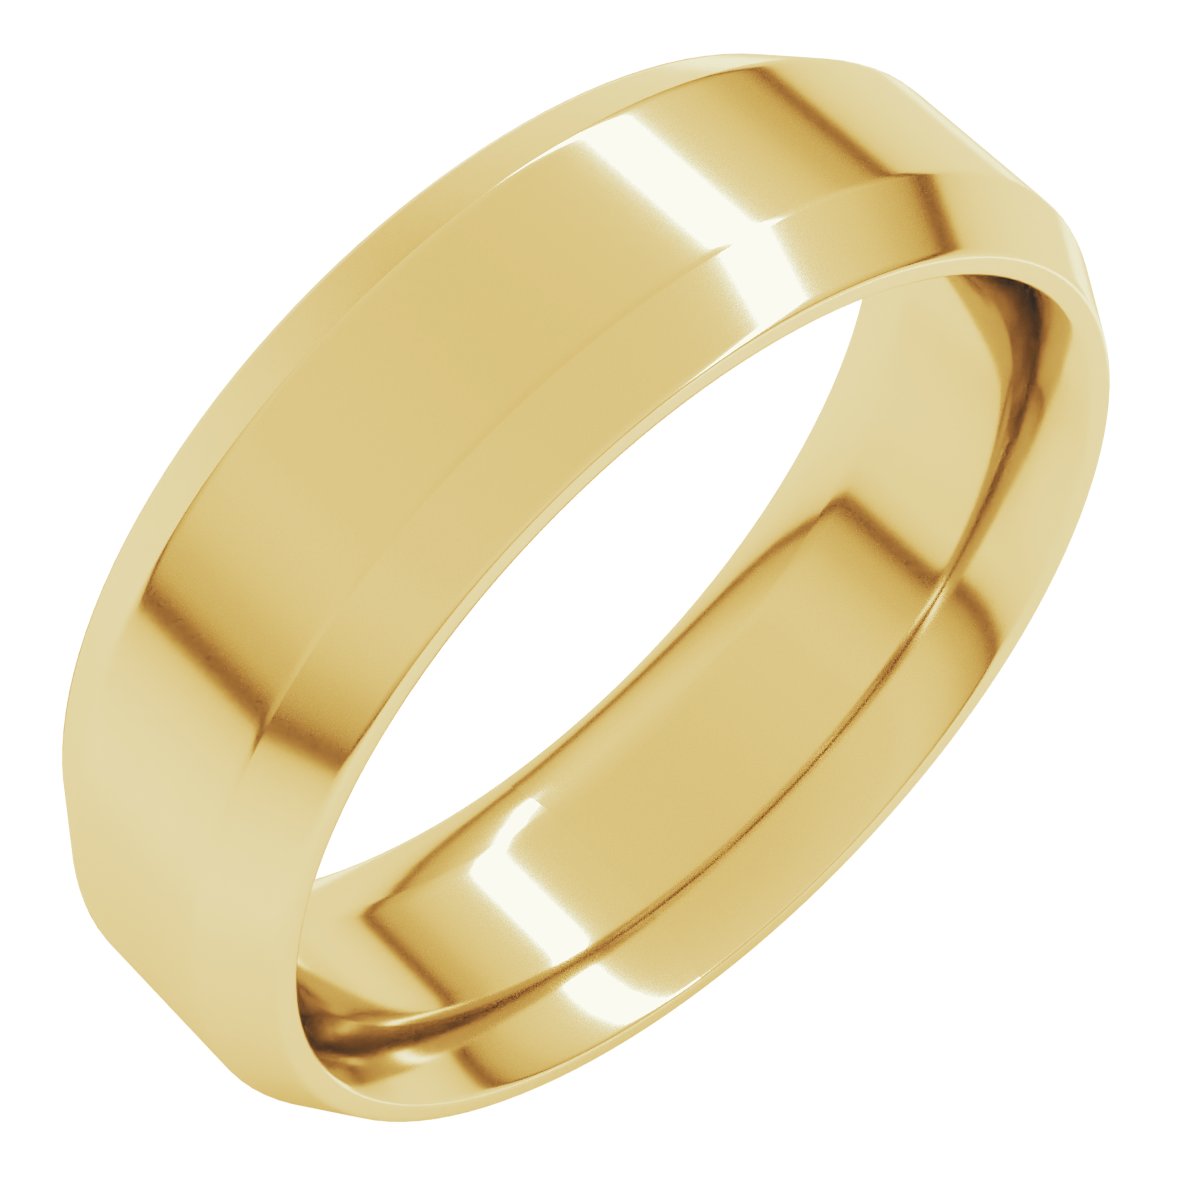 14K Yellow 6 mm Beveled-Edge Comfort-Fit Band Size 10